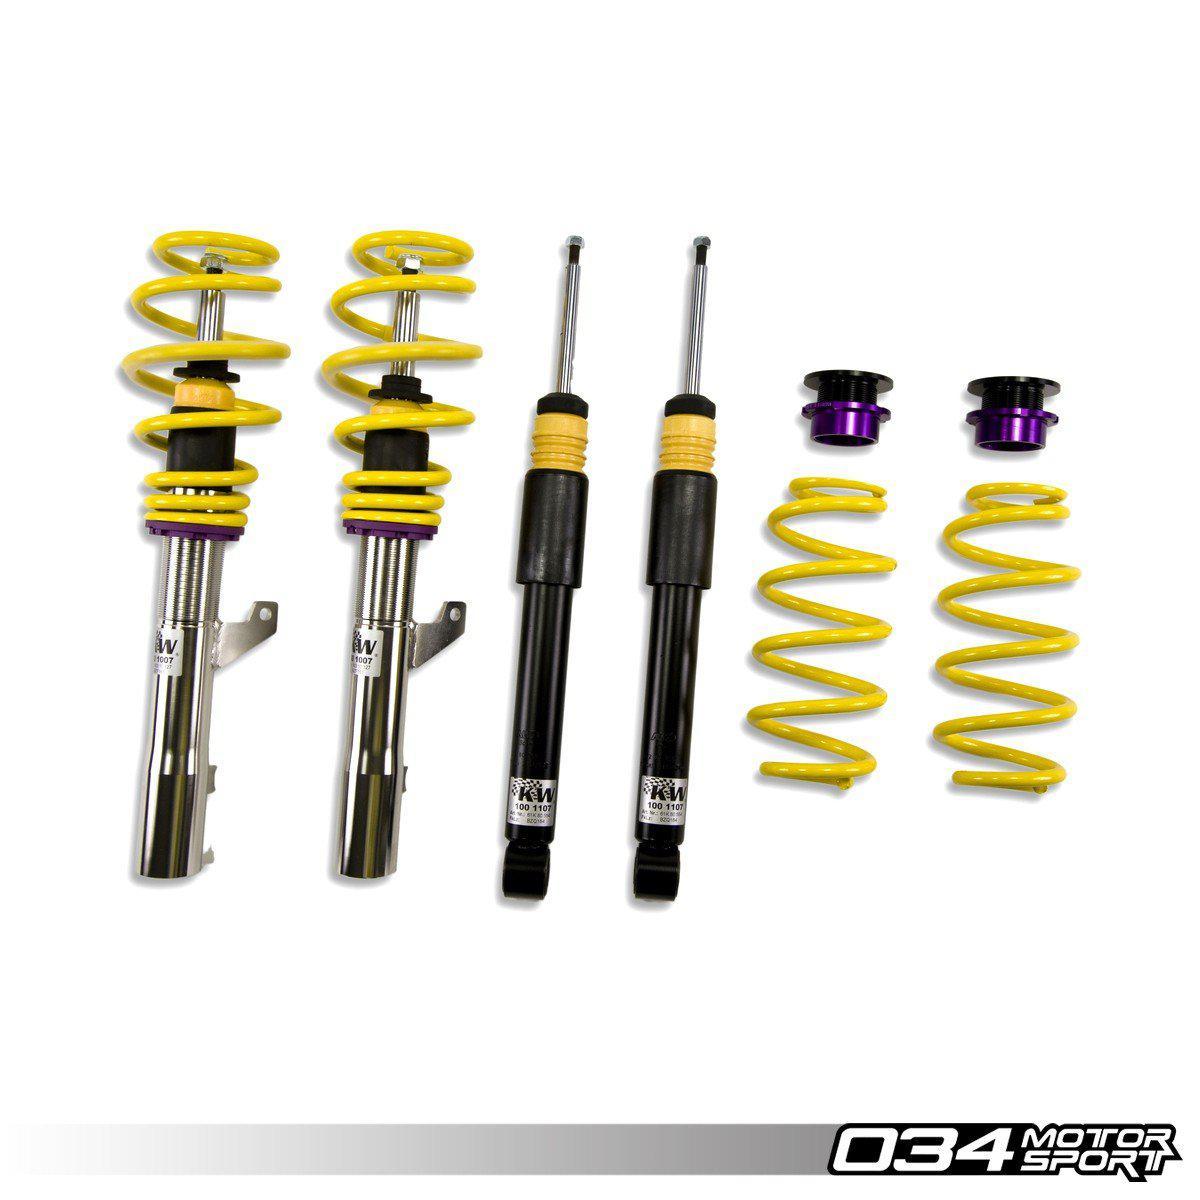 KW Variant 1 Coilover Suspension, C7/C7.5 Audi A6, FWD &amp; Quattro-A Little Tuning Co